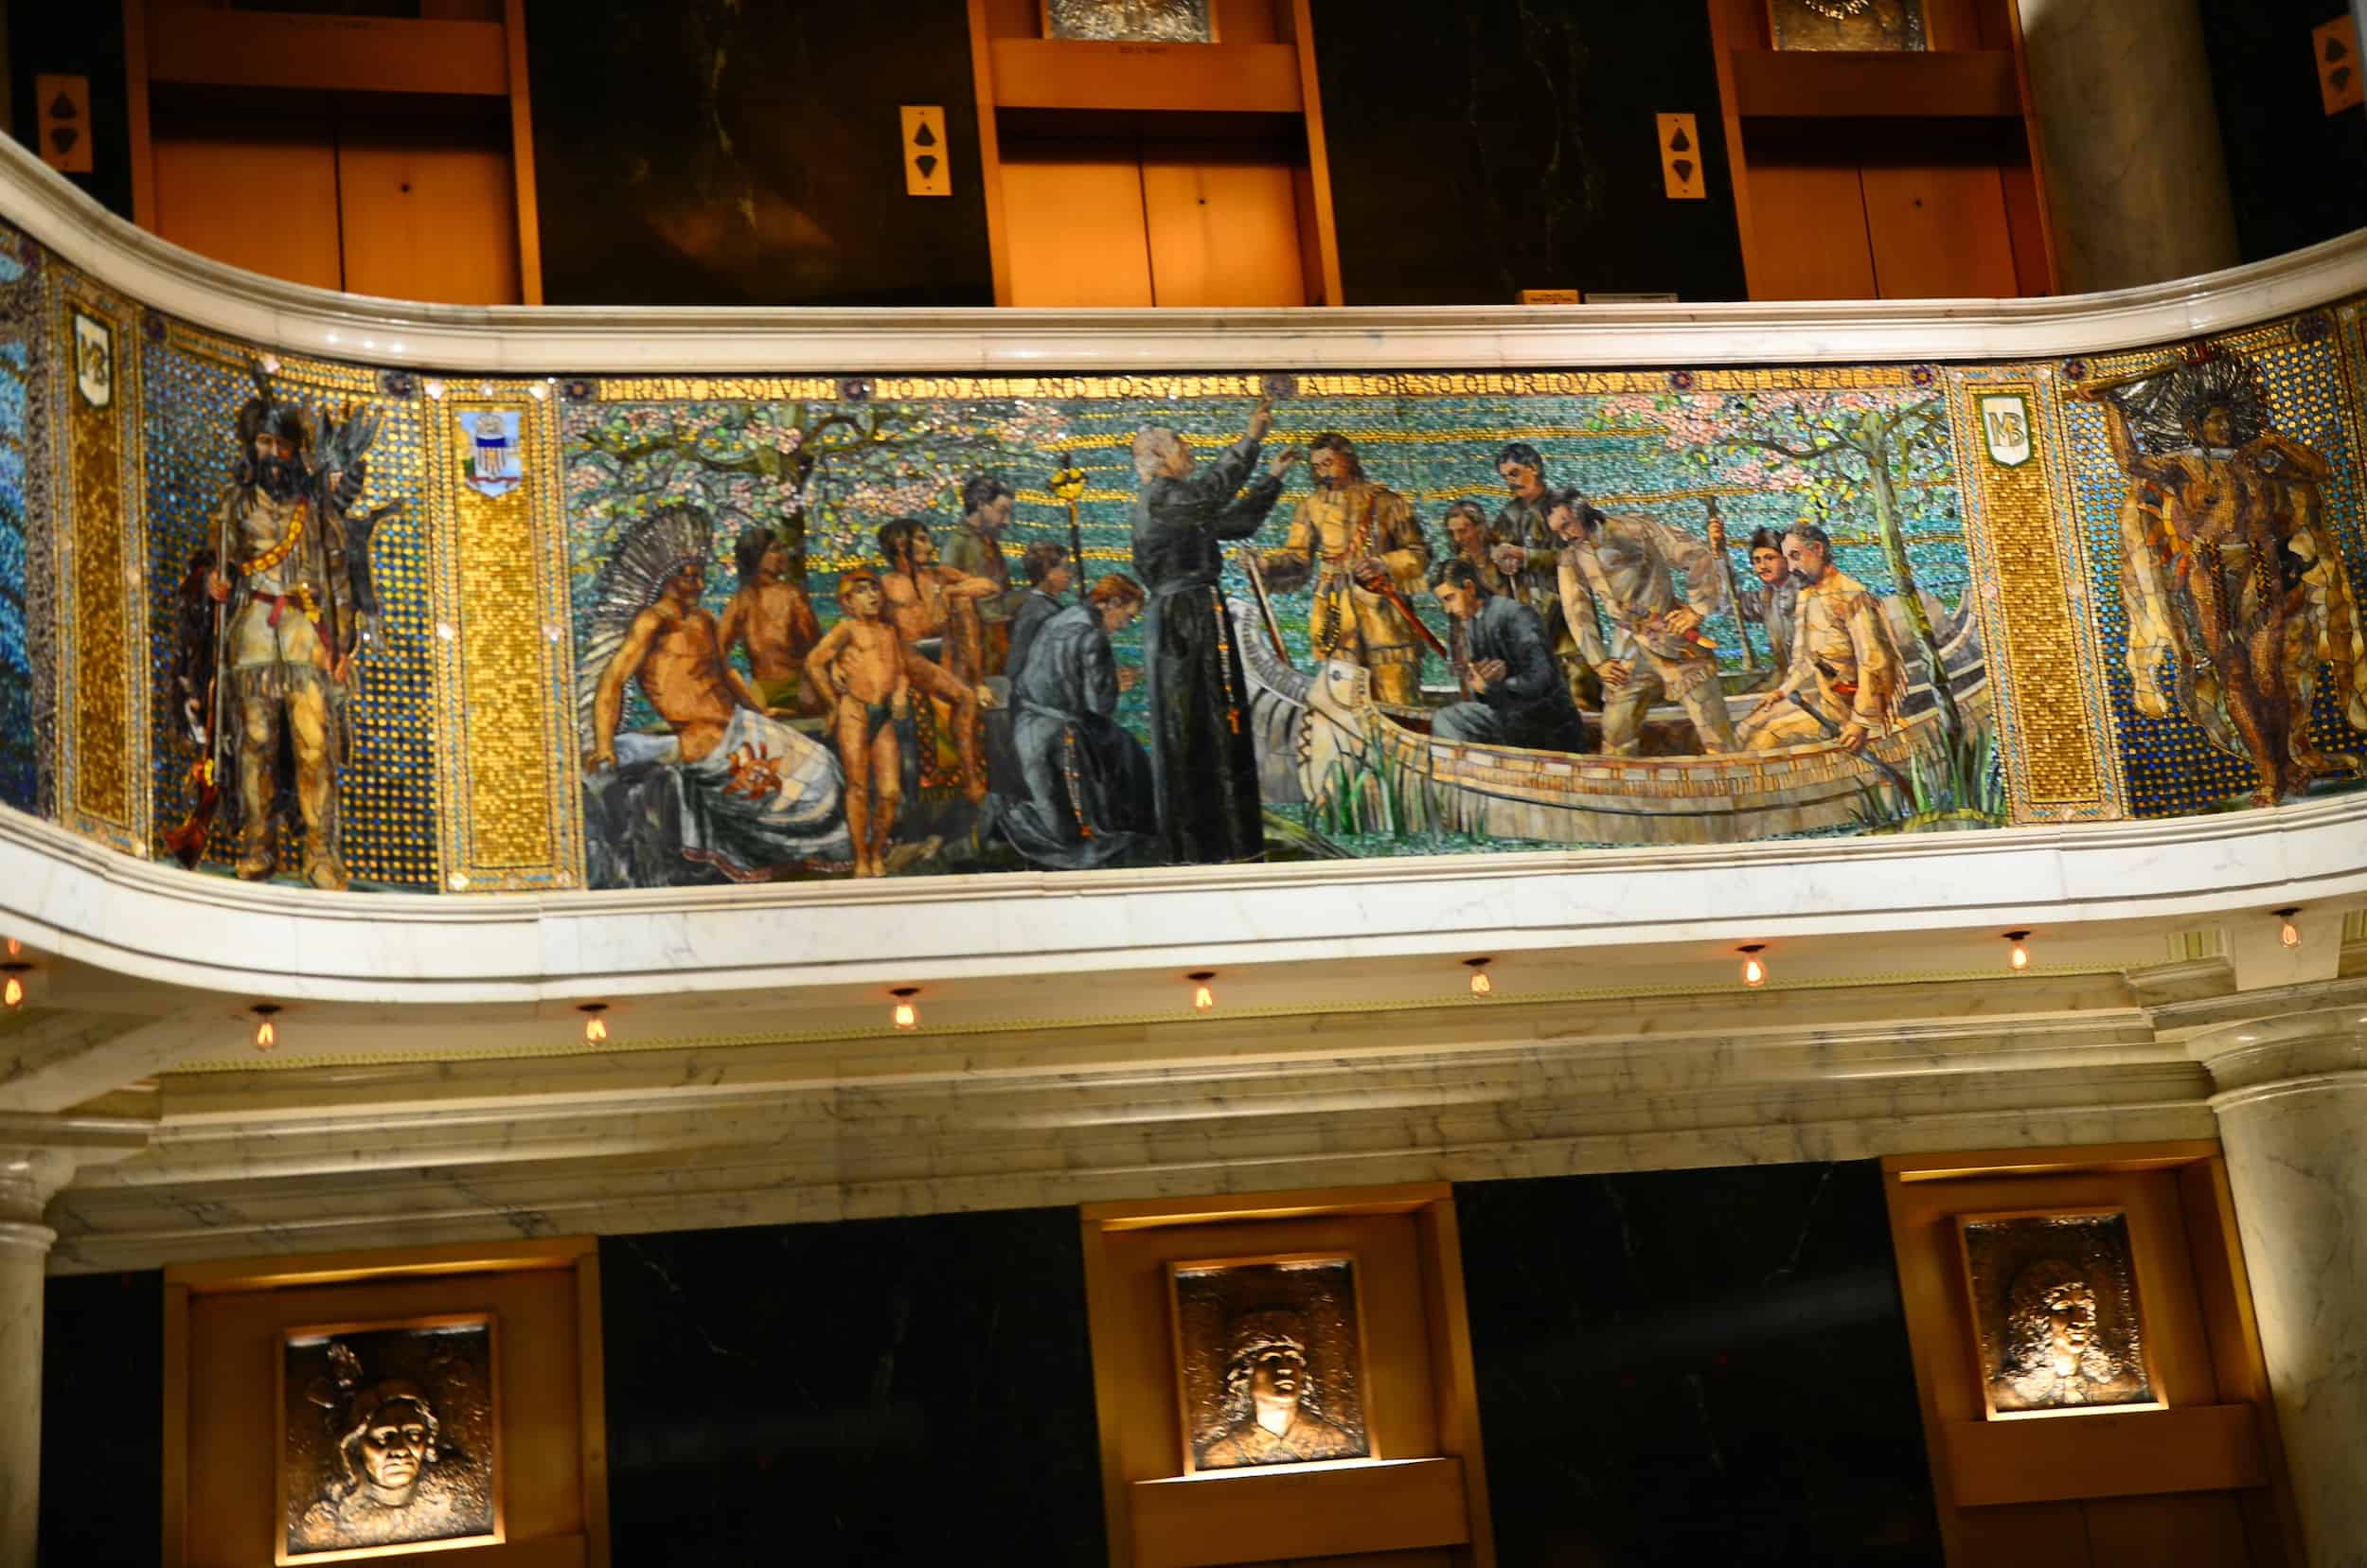 Mosaic panel in the lobby of the Marquette Building on Dearborn Street in Chicago, Illinois